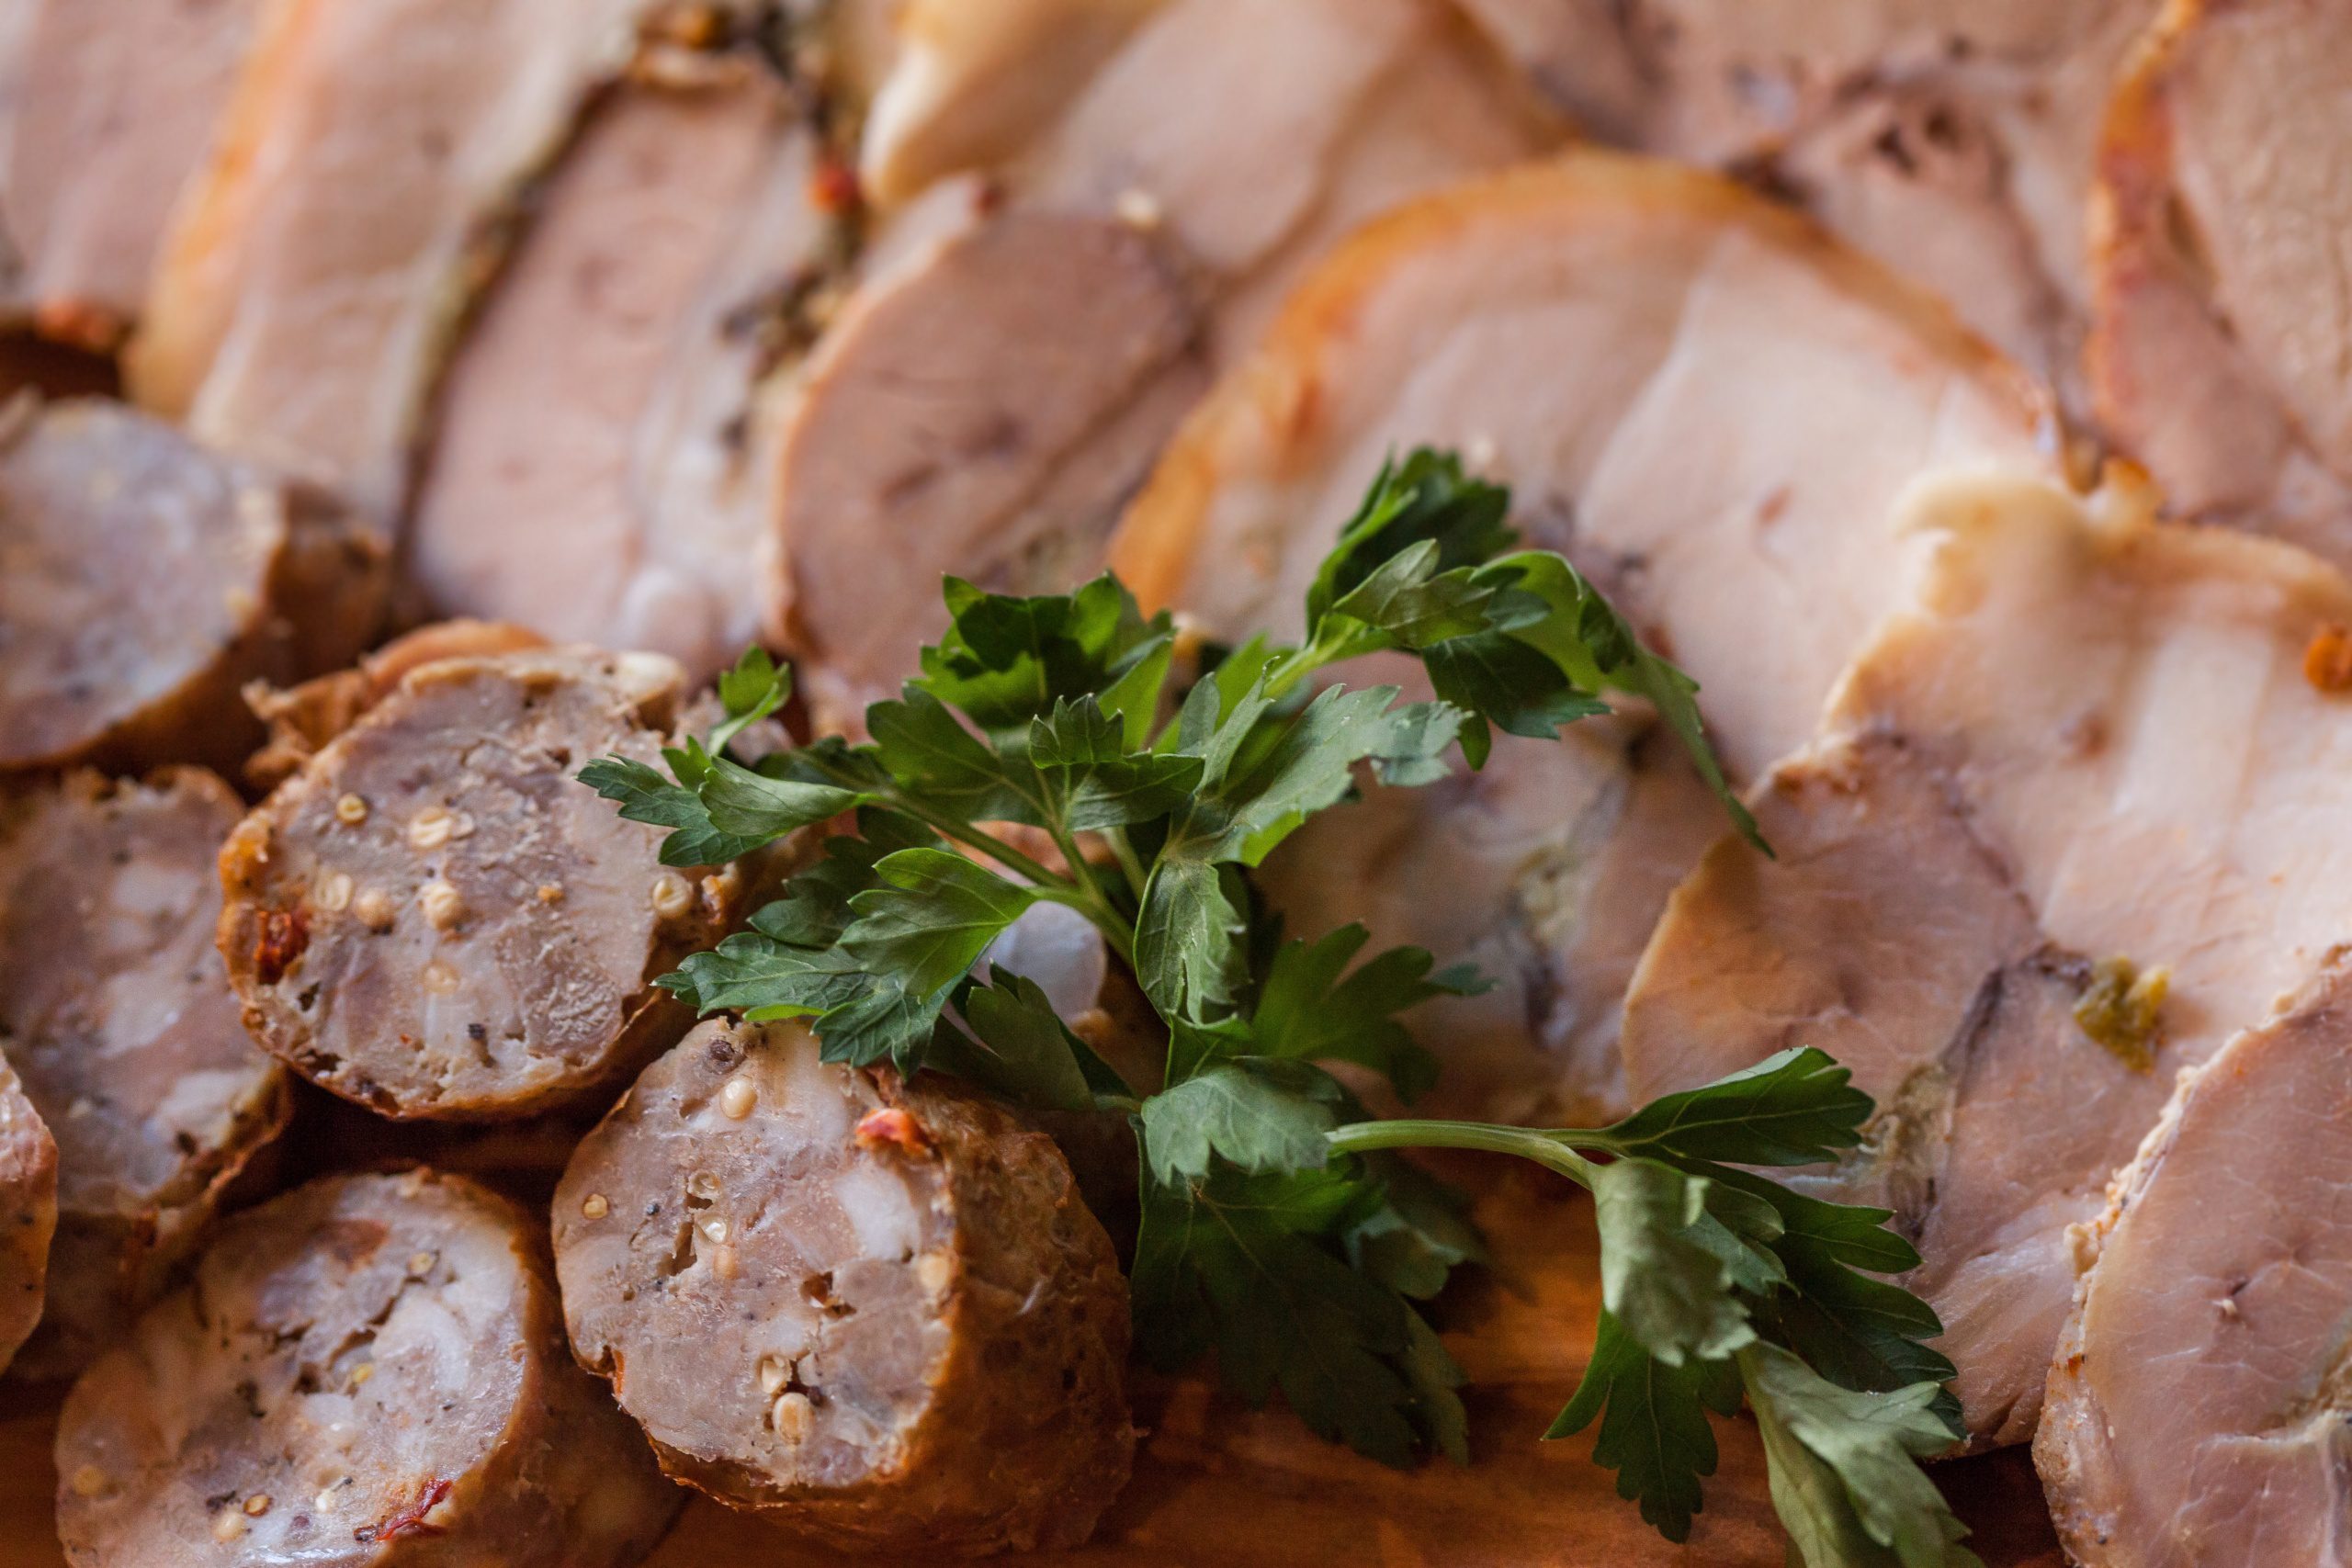 Deli meats - 19 Foods We Thought Were Healthy, But Aren't